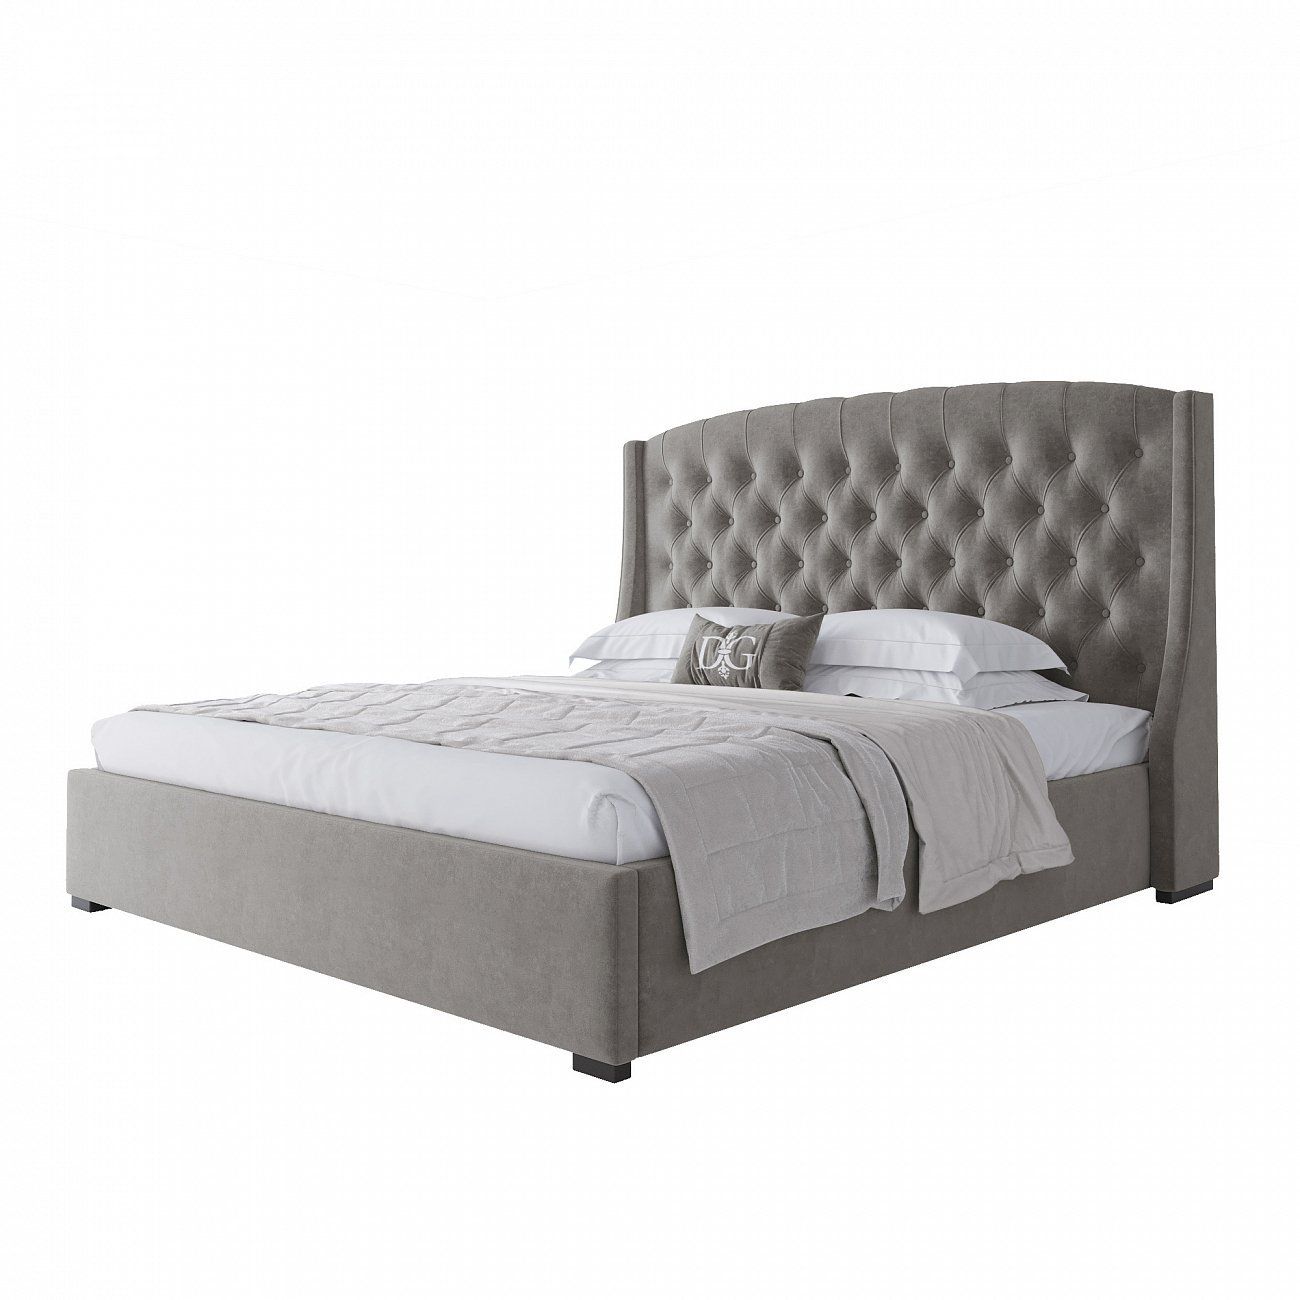 Double bed 180x200 without studs light grey Hugo